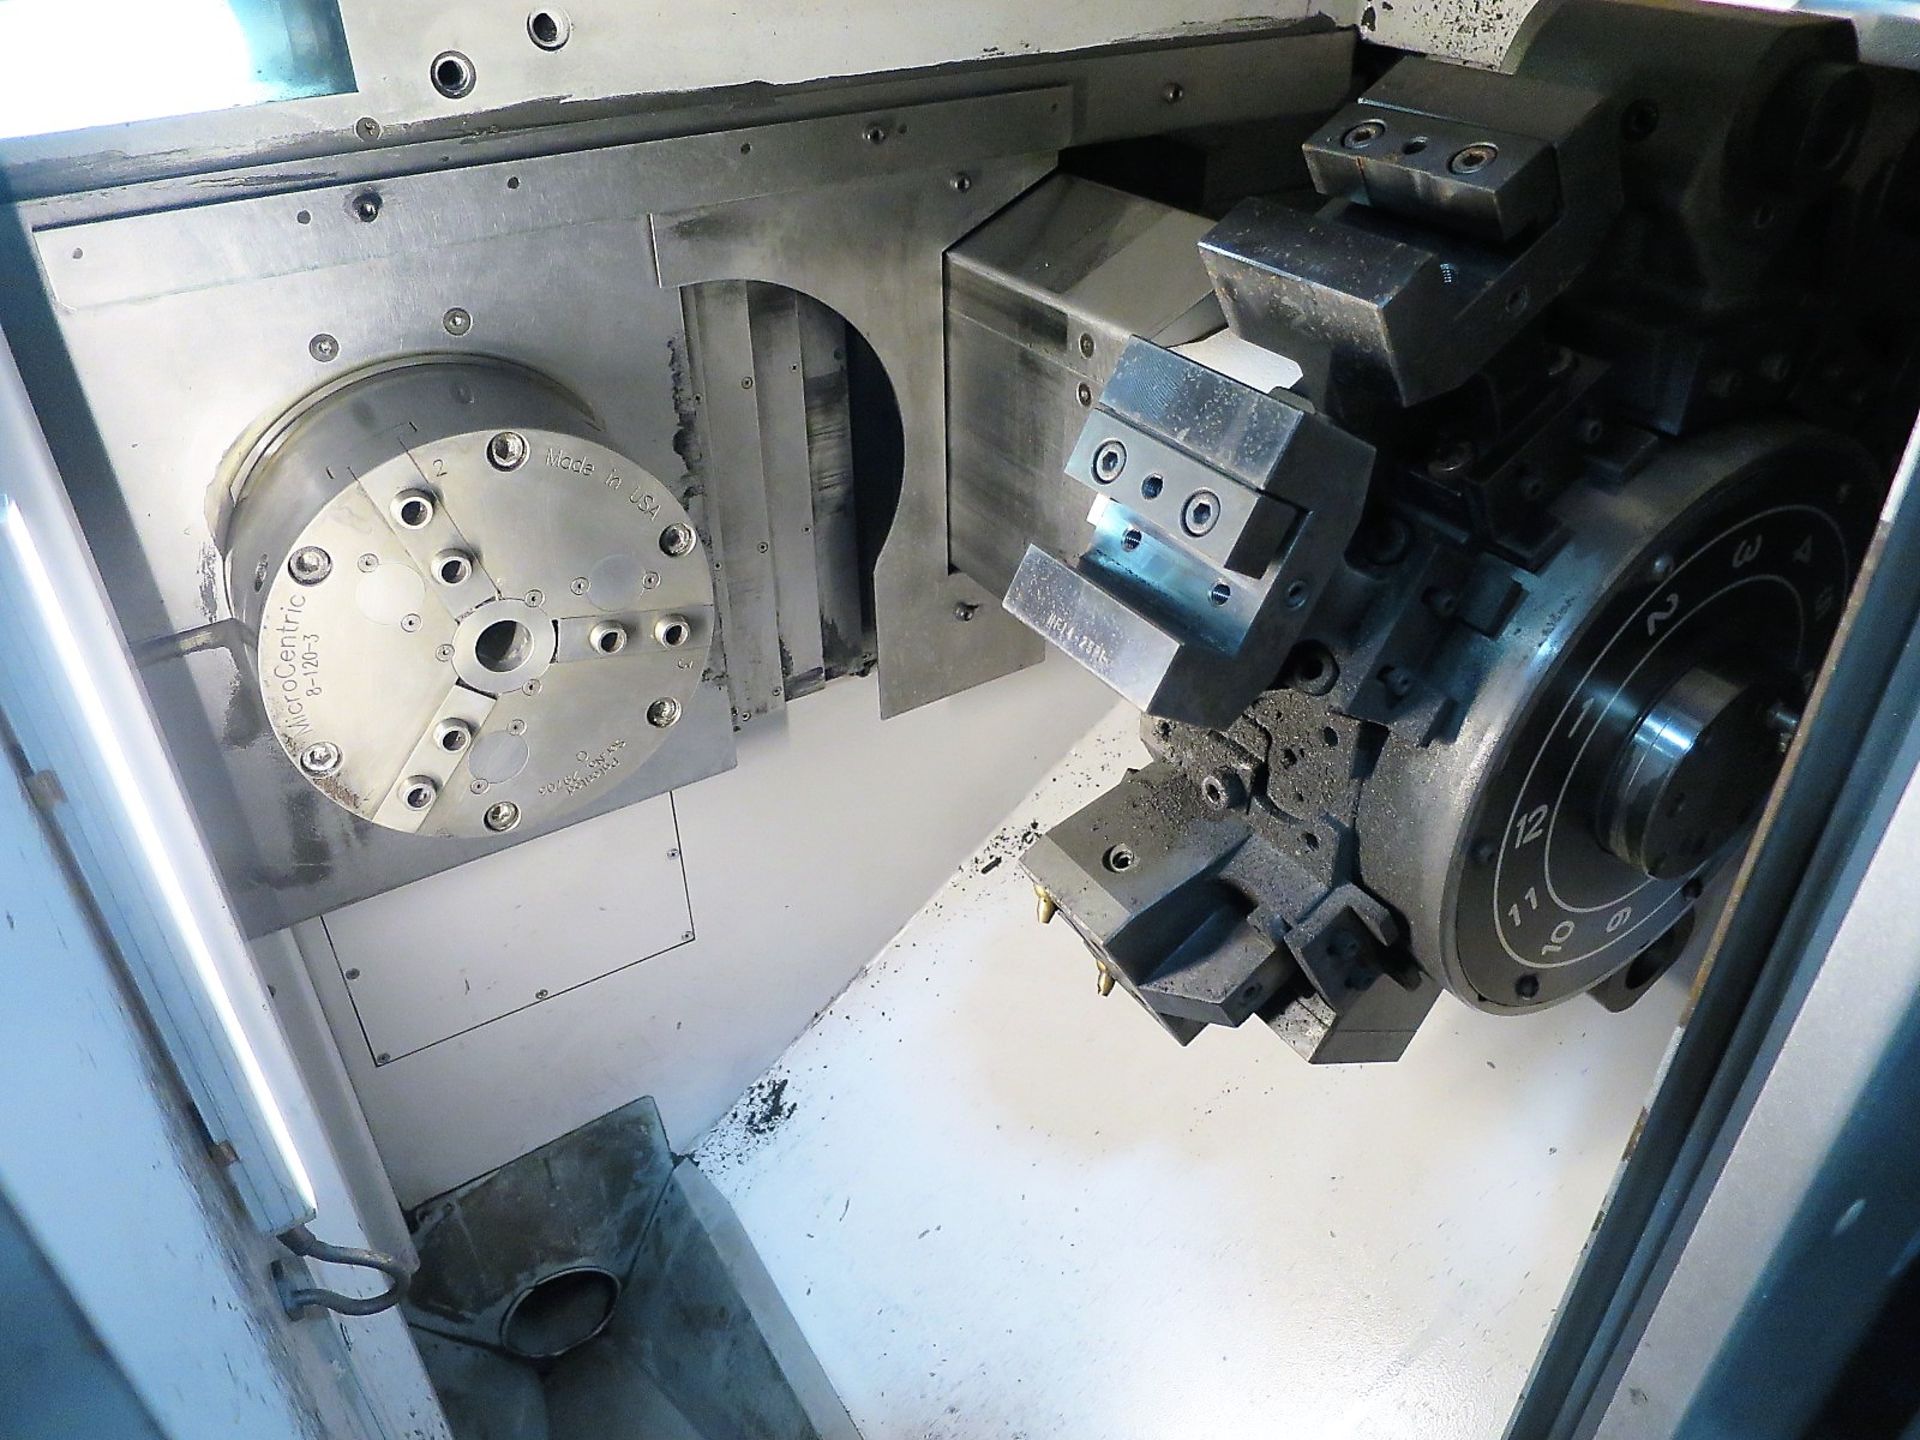 OKUMA 2SP-150HM TWIN SPINDLE 3-AXIS TURNING CENTER W/LIVE MILLING, S/N 156690, NEW 2011 - Image 5 of 11